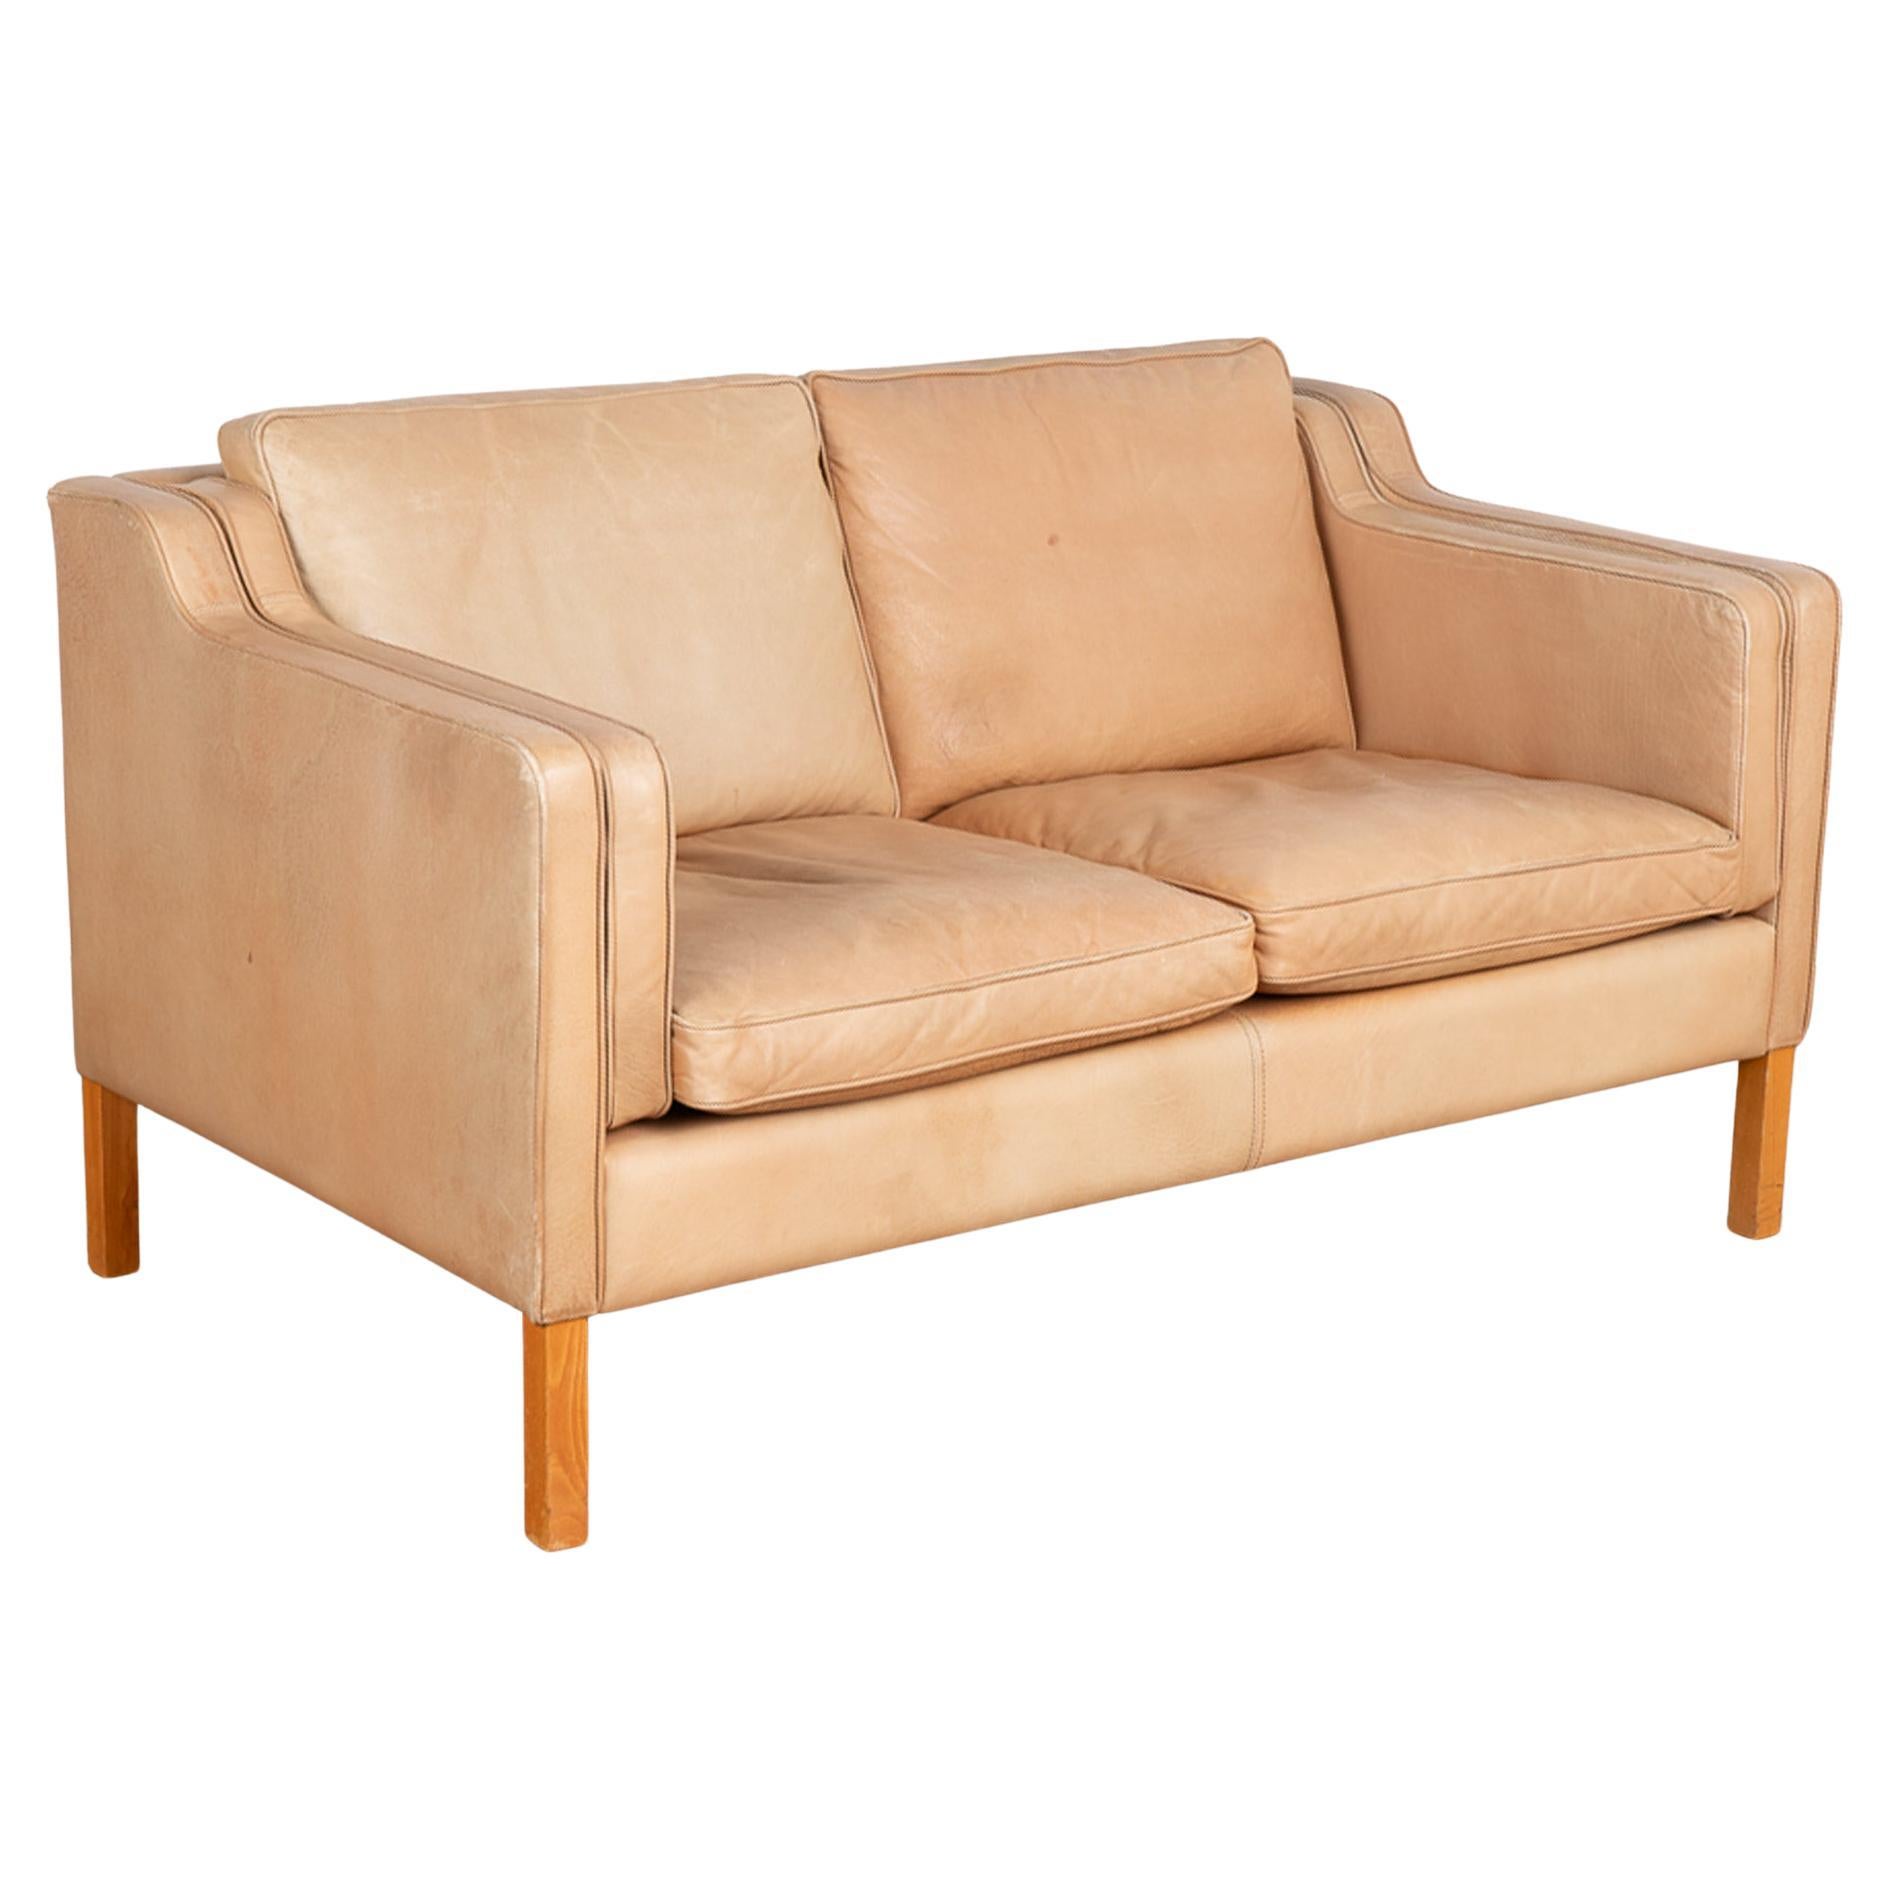 Mid Century Two Seat Sofa Loveseat by Stouby of Denmark, circa 1960-70